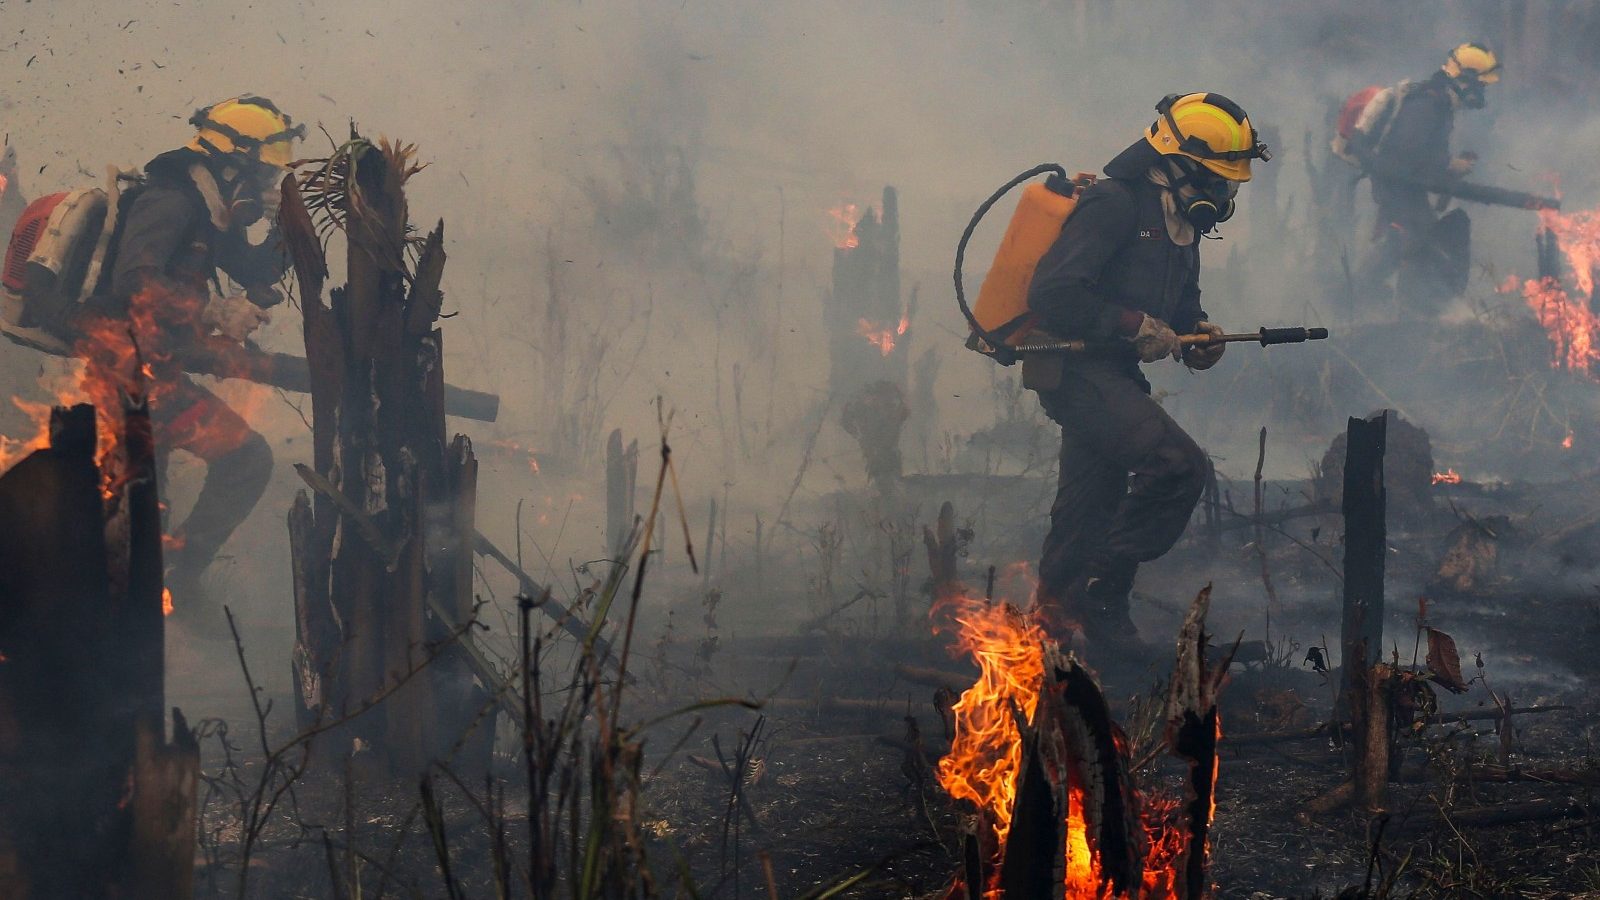 Firefighters and volunteers combat a fire on the Amazonia rainforest in Apui, Brazil, on September 21, 2022.